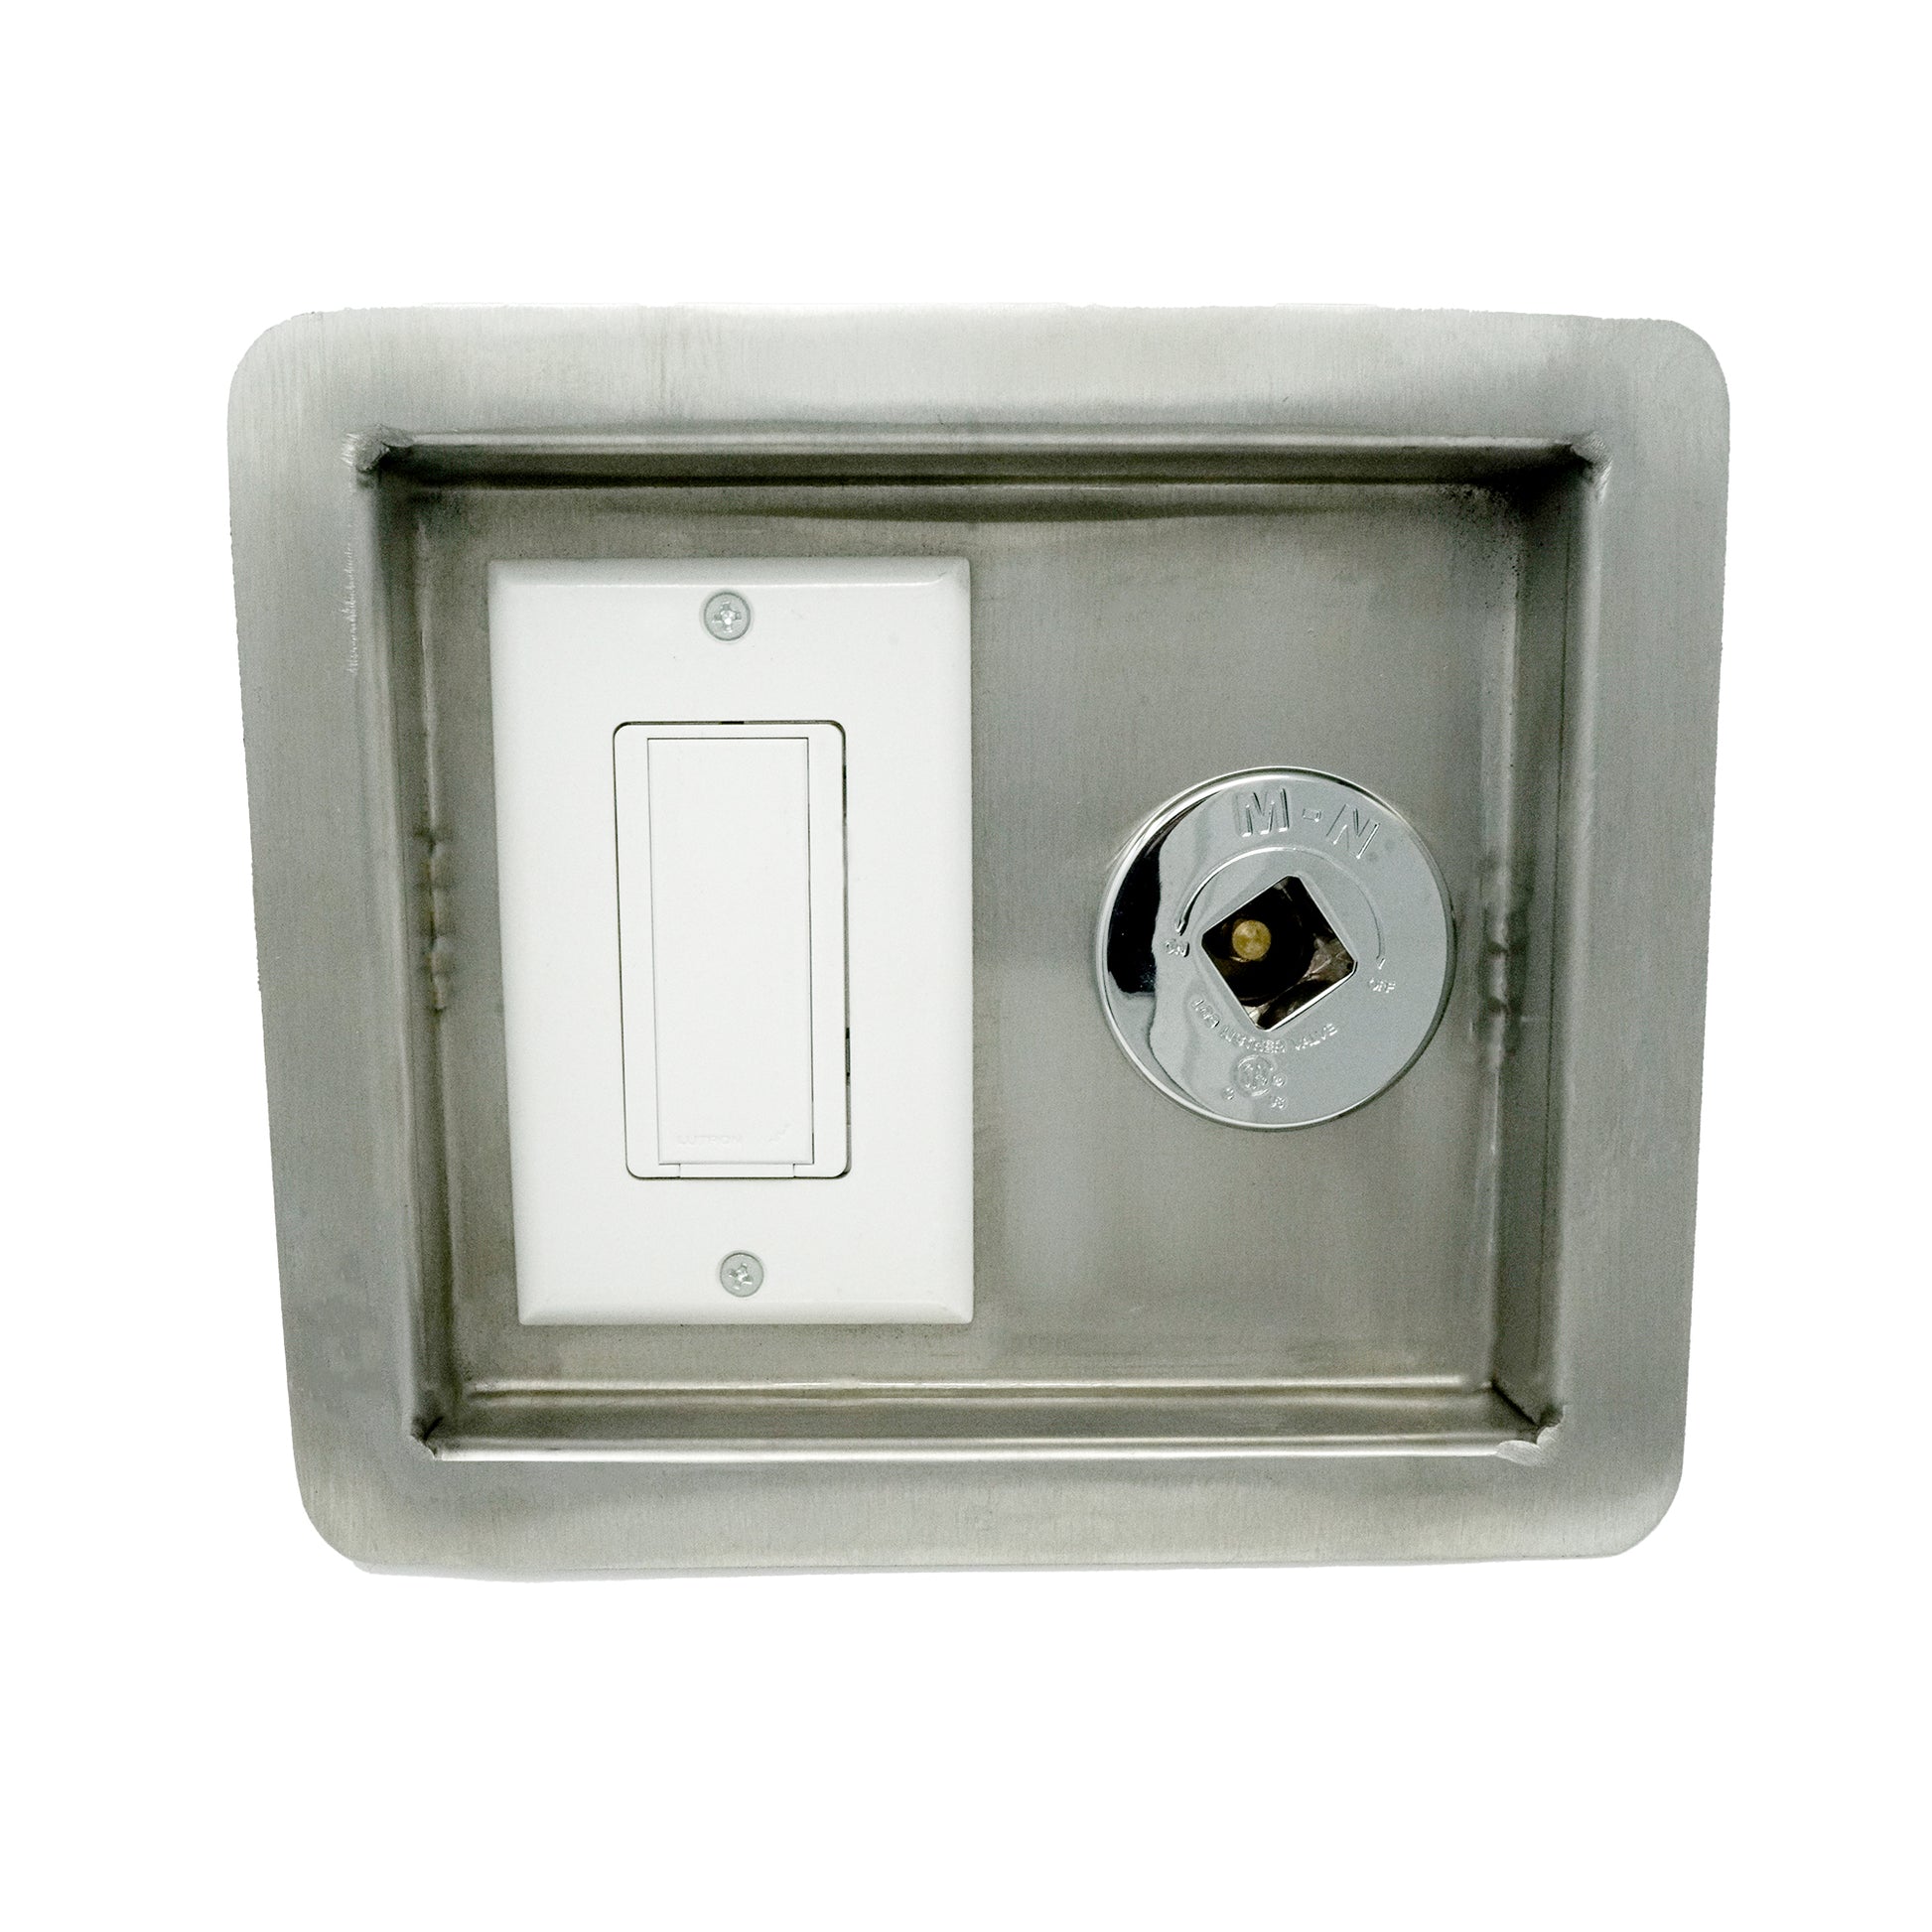 Light Switch and Key Valve Recessed SS Panel copy 1